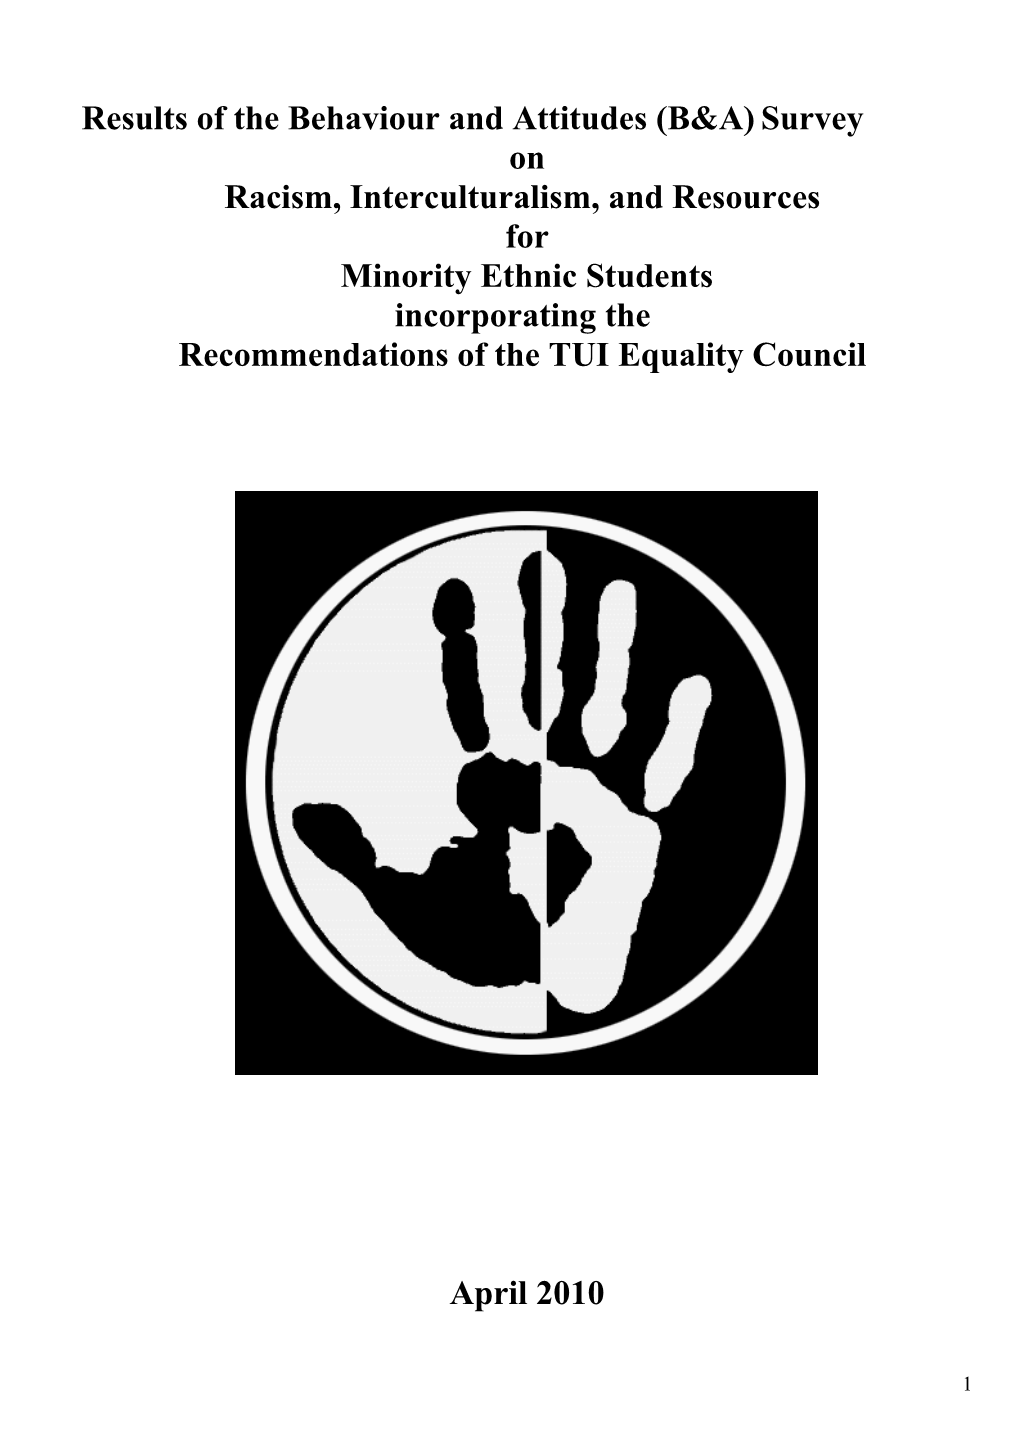 Draft Policy Document on Racism, Interculturalism, and Resources for Minority Ethnic Students